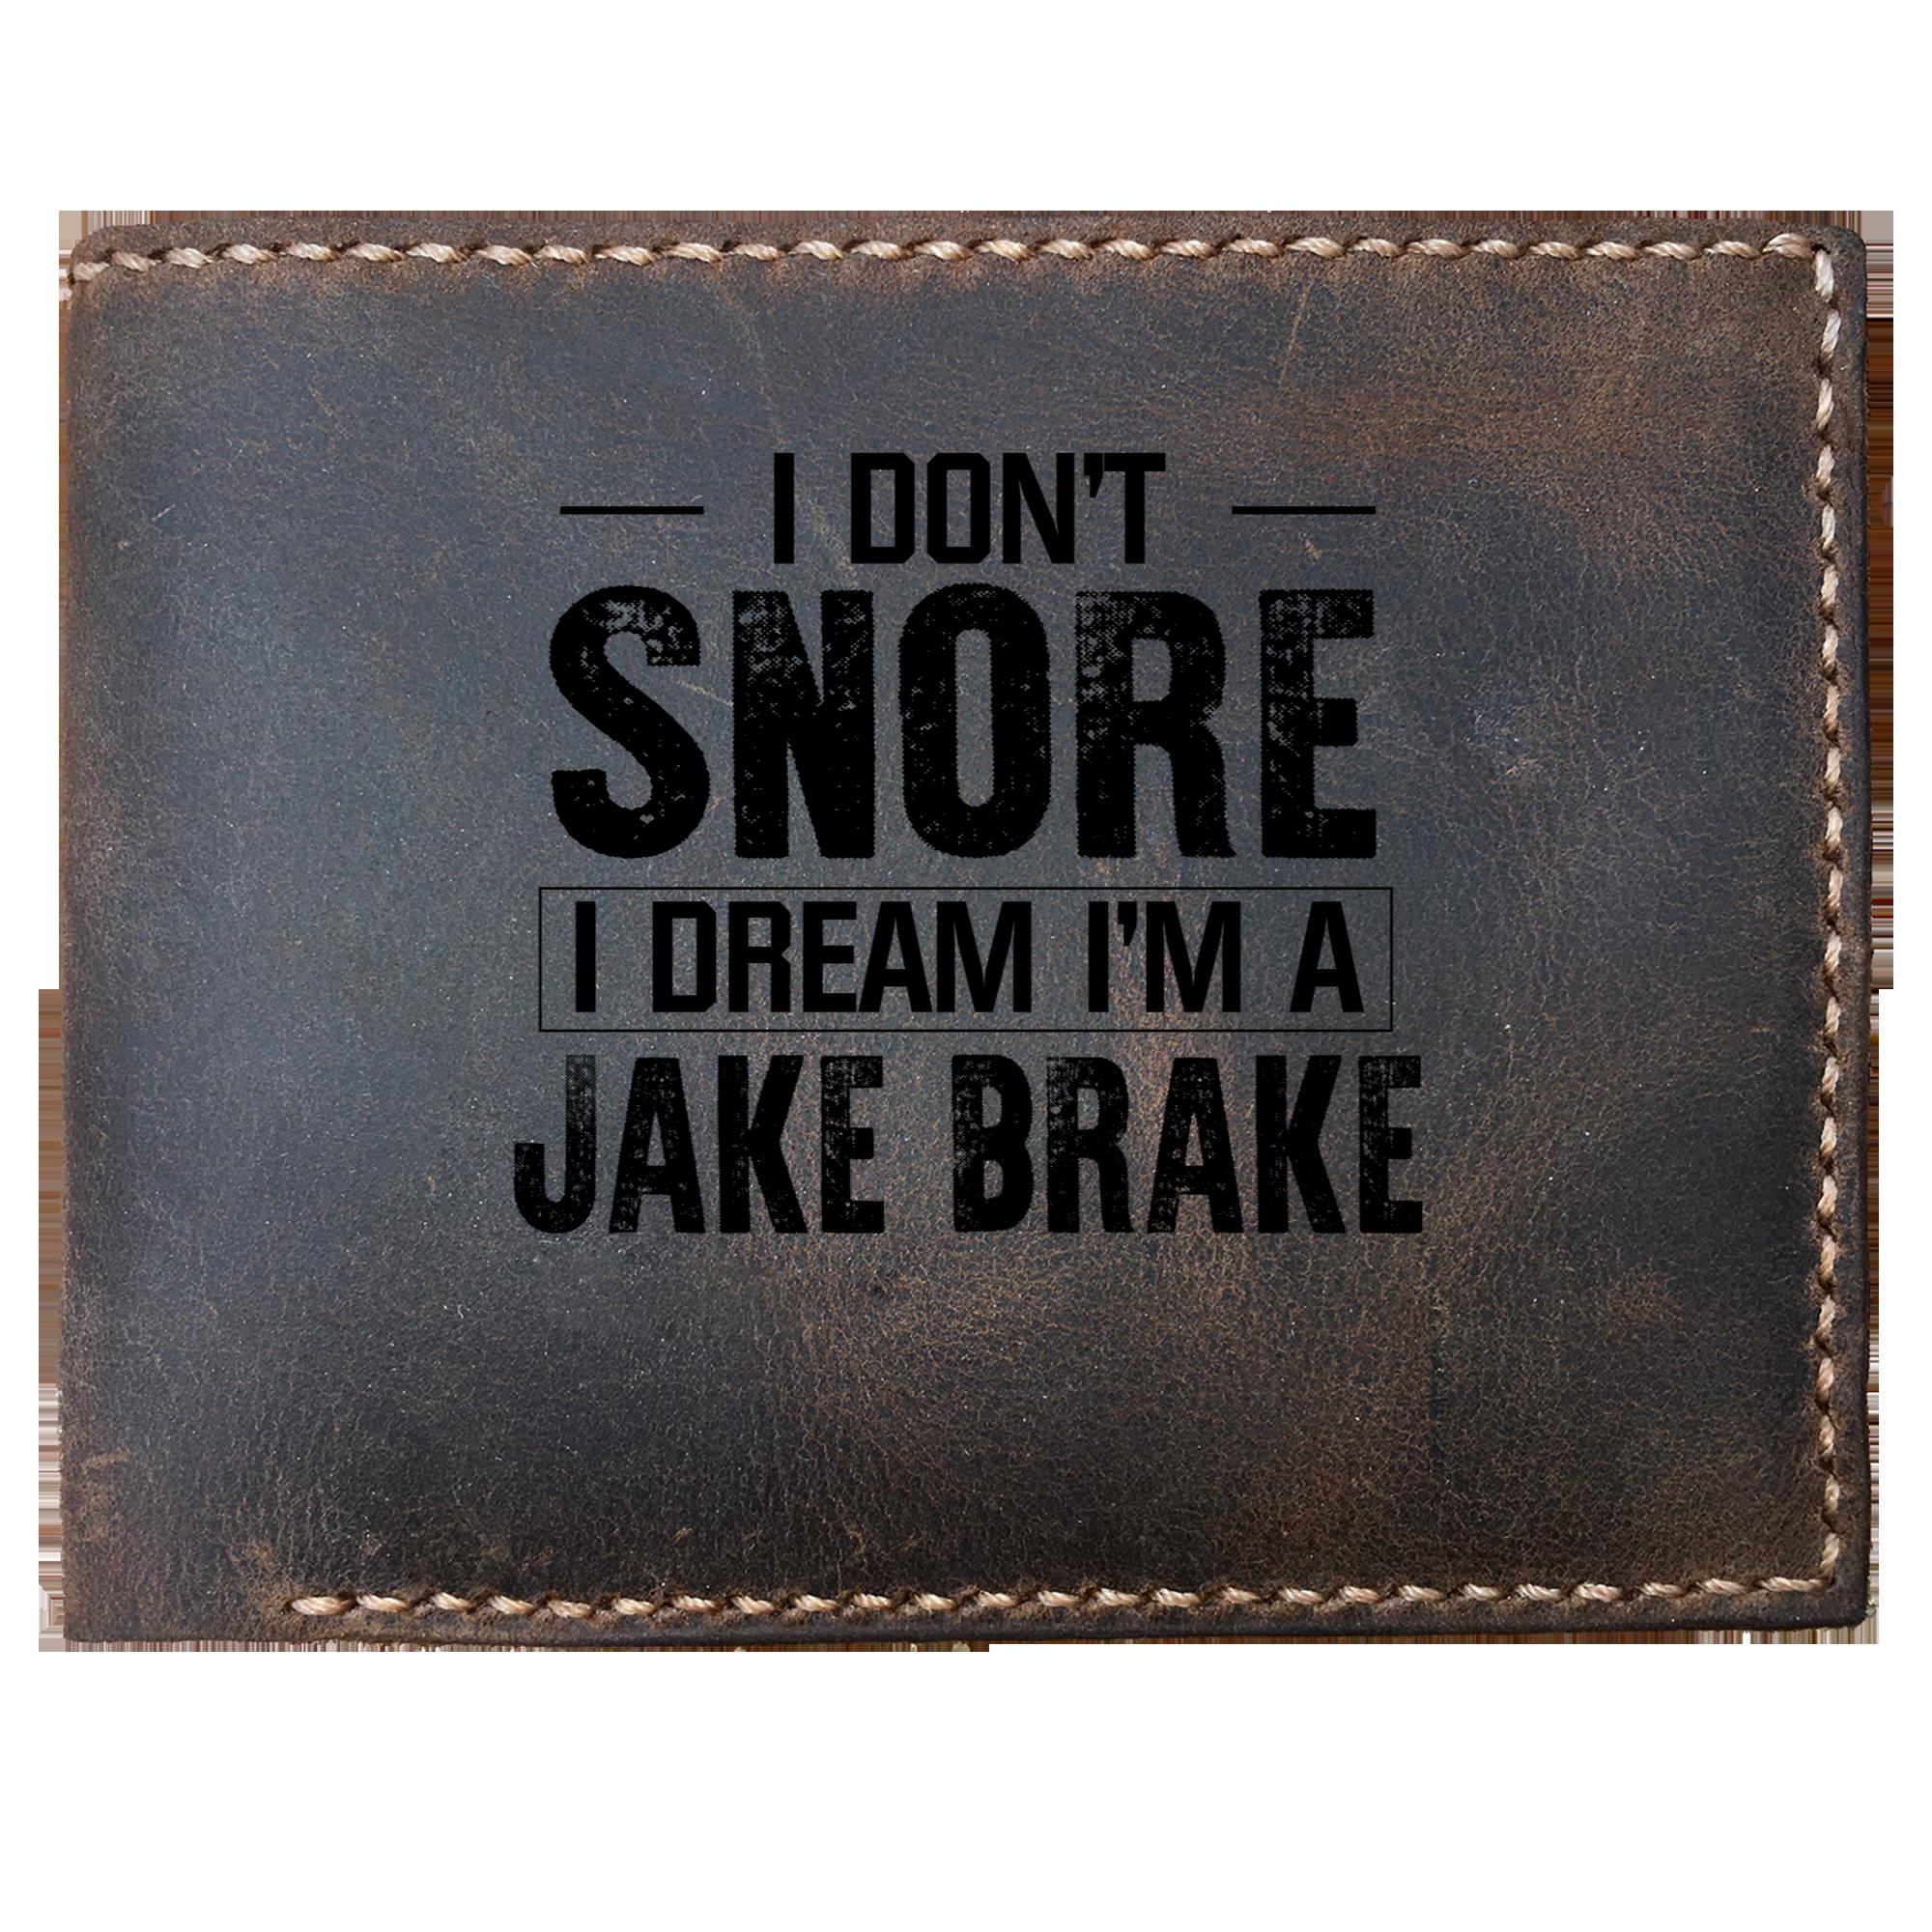 Skitongifts Funny Custom Laser Engraved Bifold Leather Wallet For Men, I Don't Snore I Dream I'm A Jake Brake